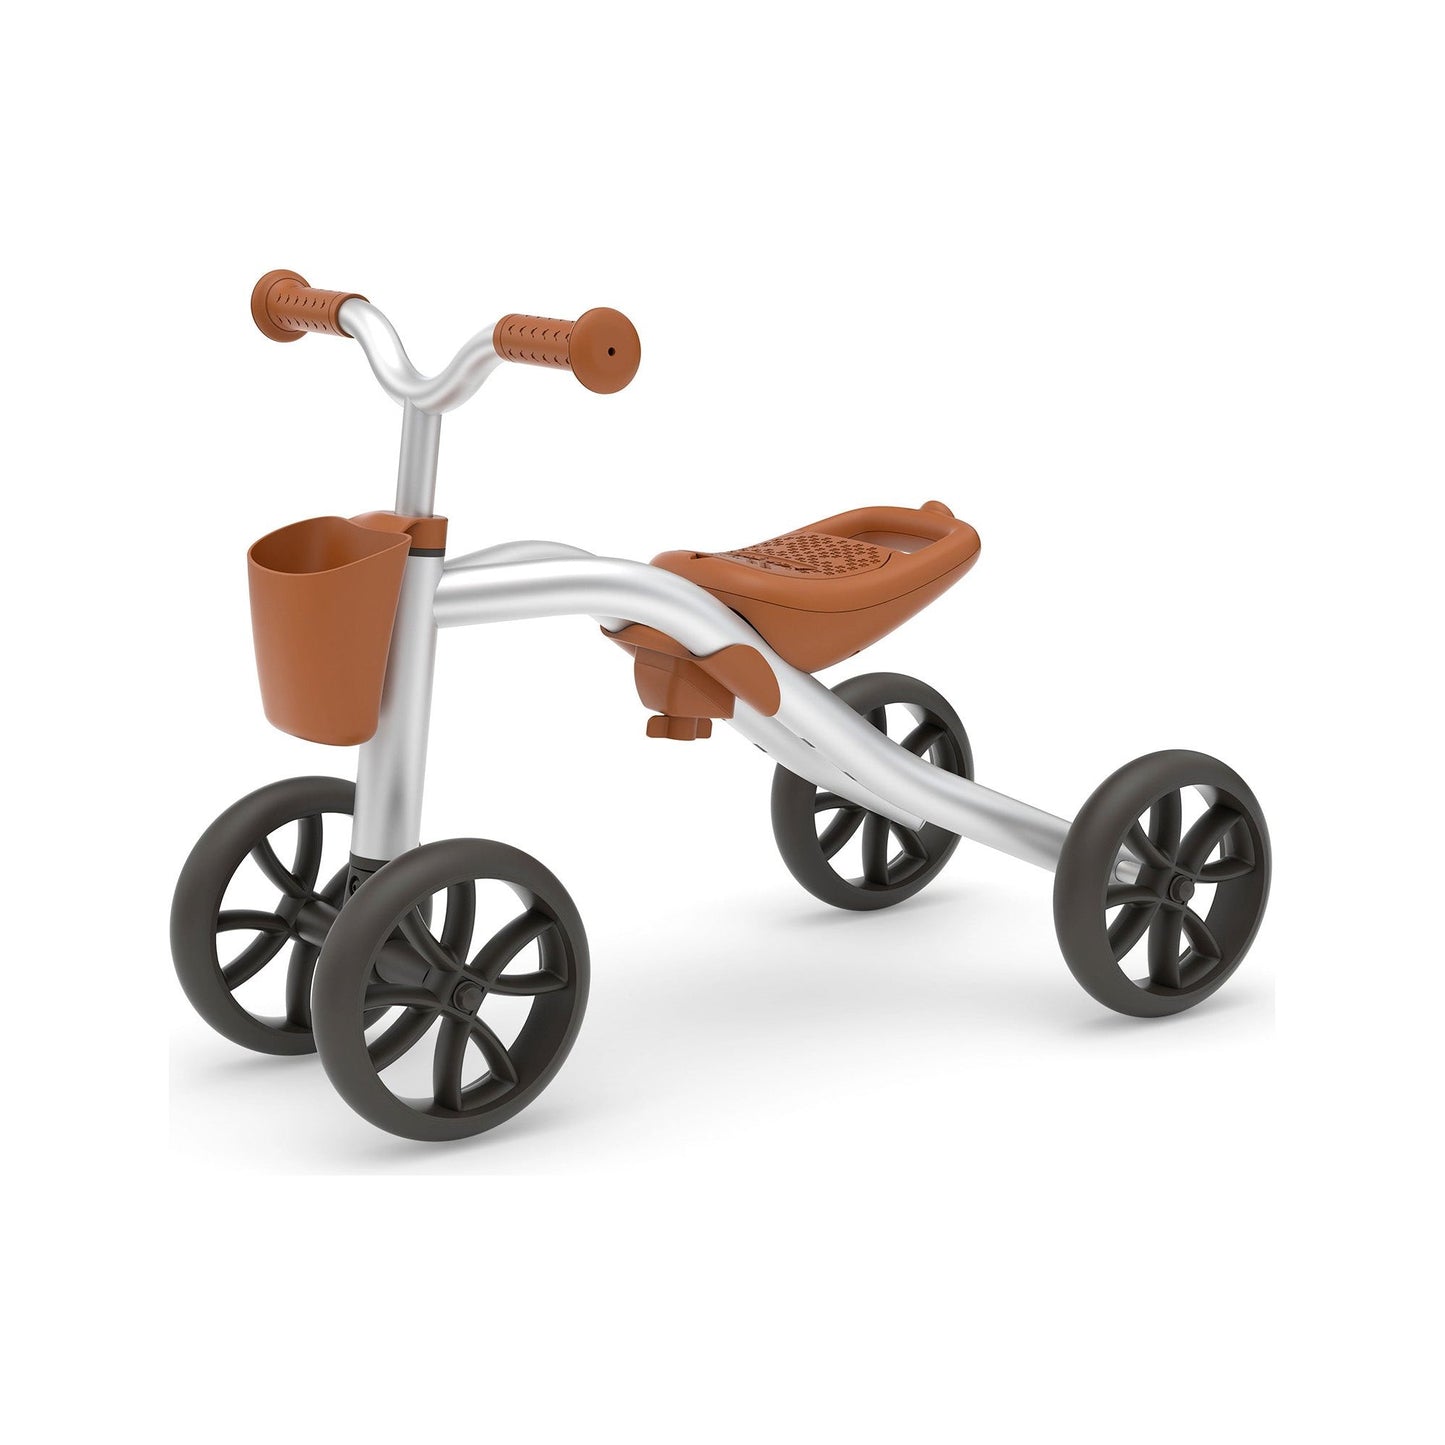 Chillafish Quadie 2 Ride-On and Basket Silver front left